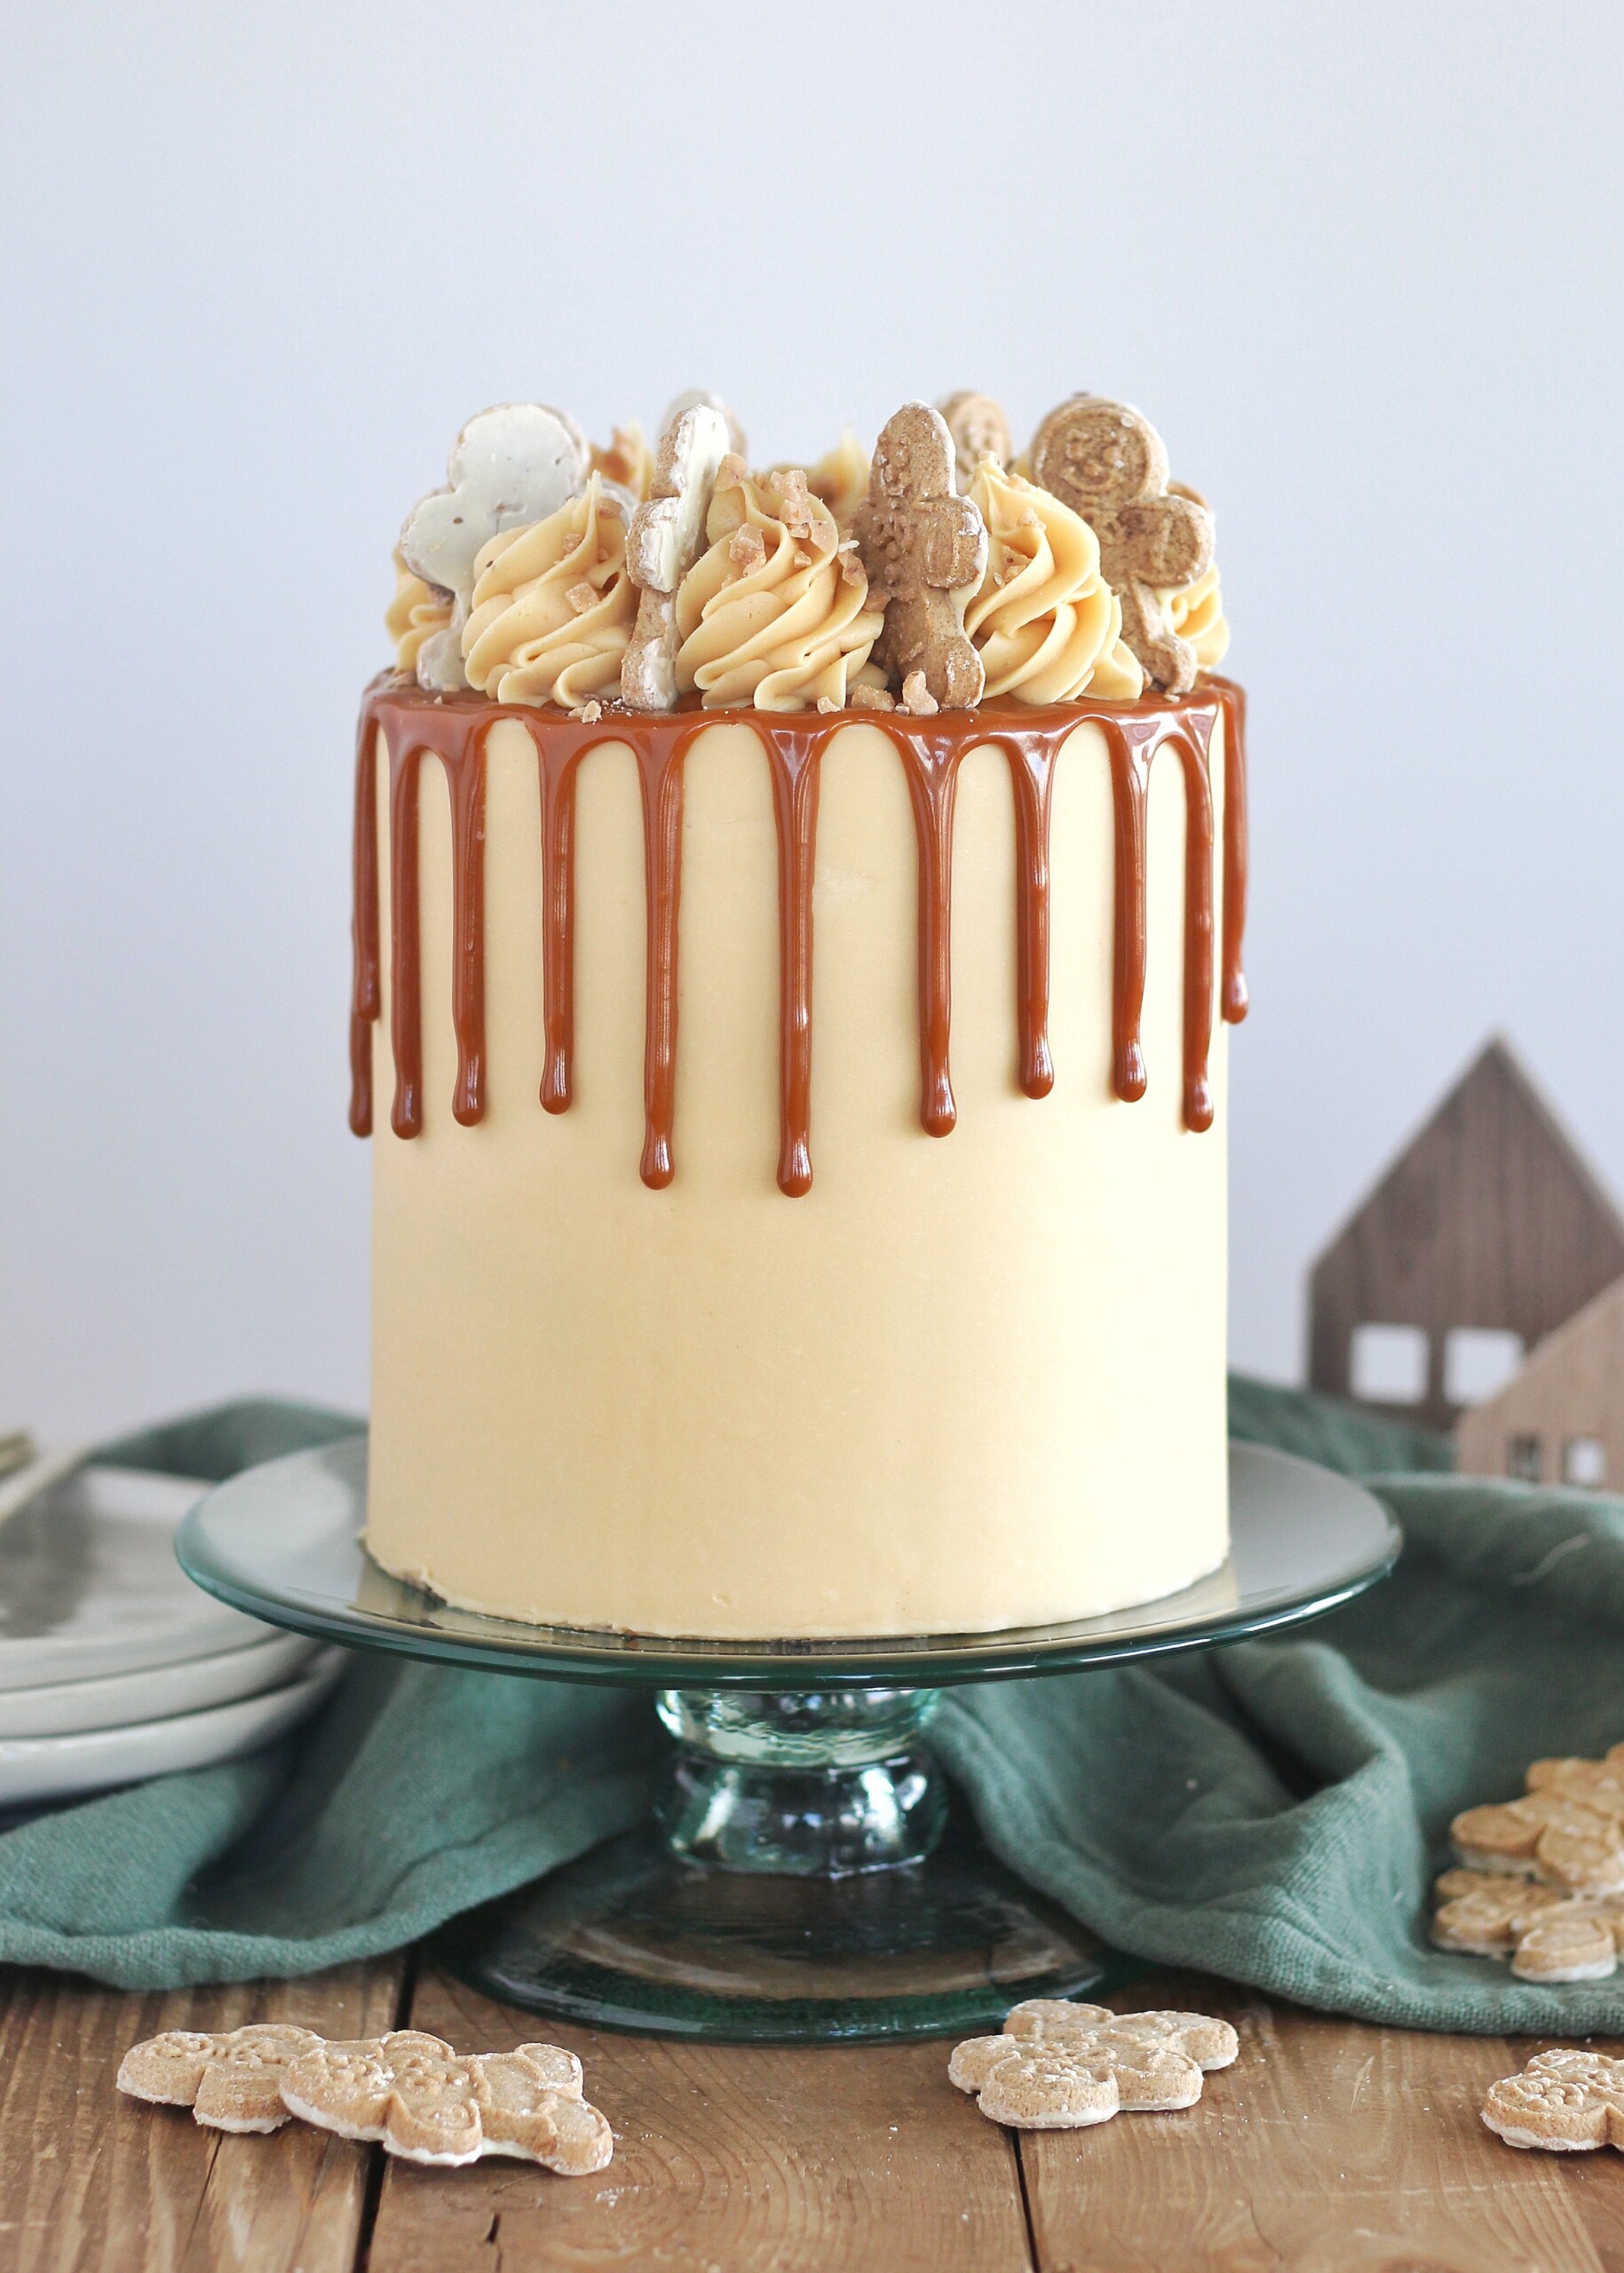 Gingerbread cake layers with salted caramel buttercream, caramel drip and toffee bits.